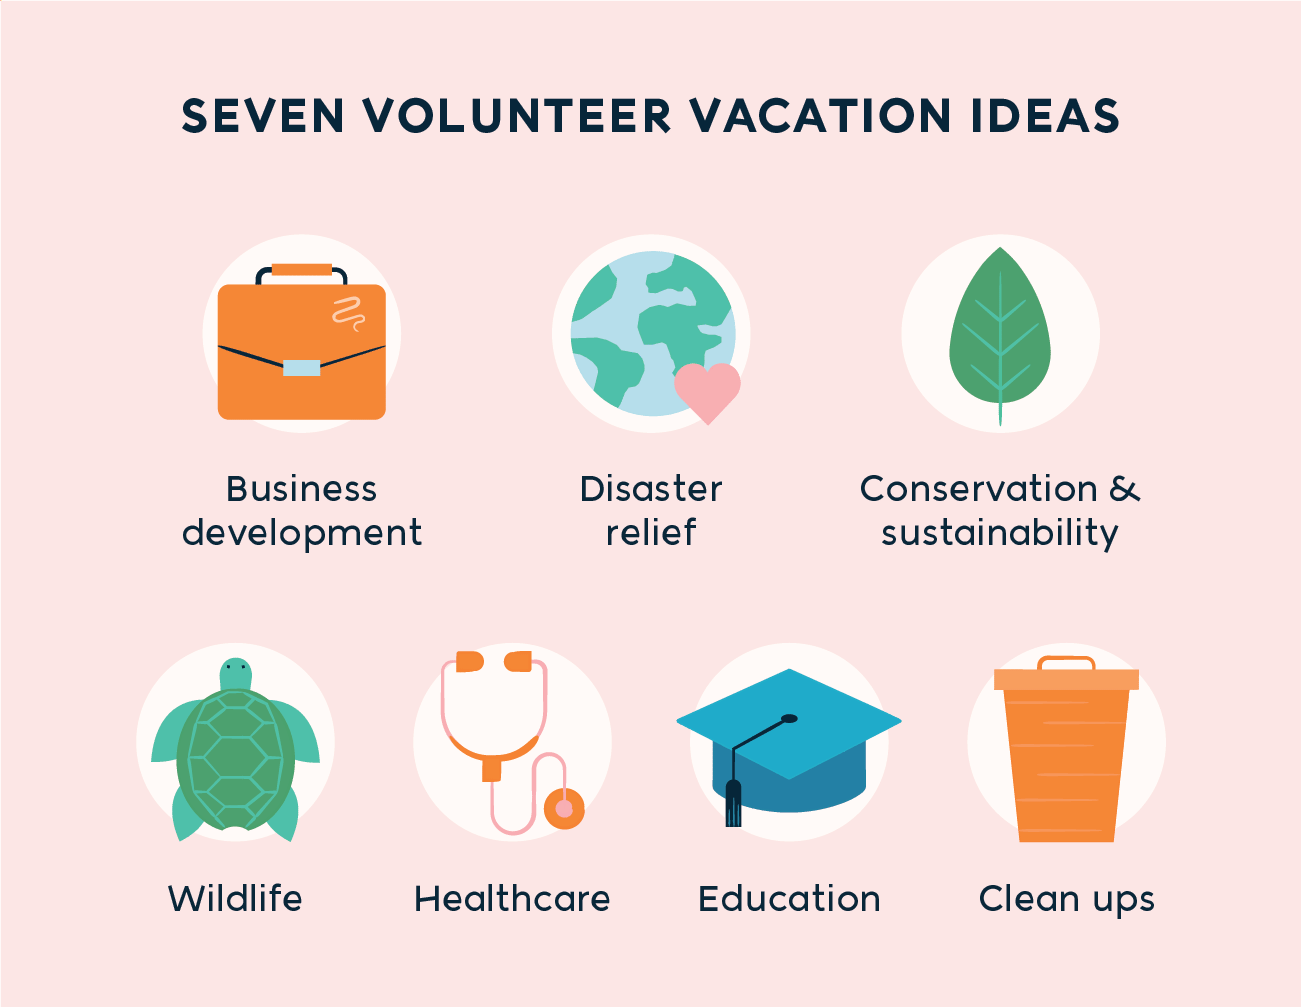 seven volunteer vacation ideas - business development, disaster relief, conservation and sustainability, wildlife, healthcare, education, clean ups